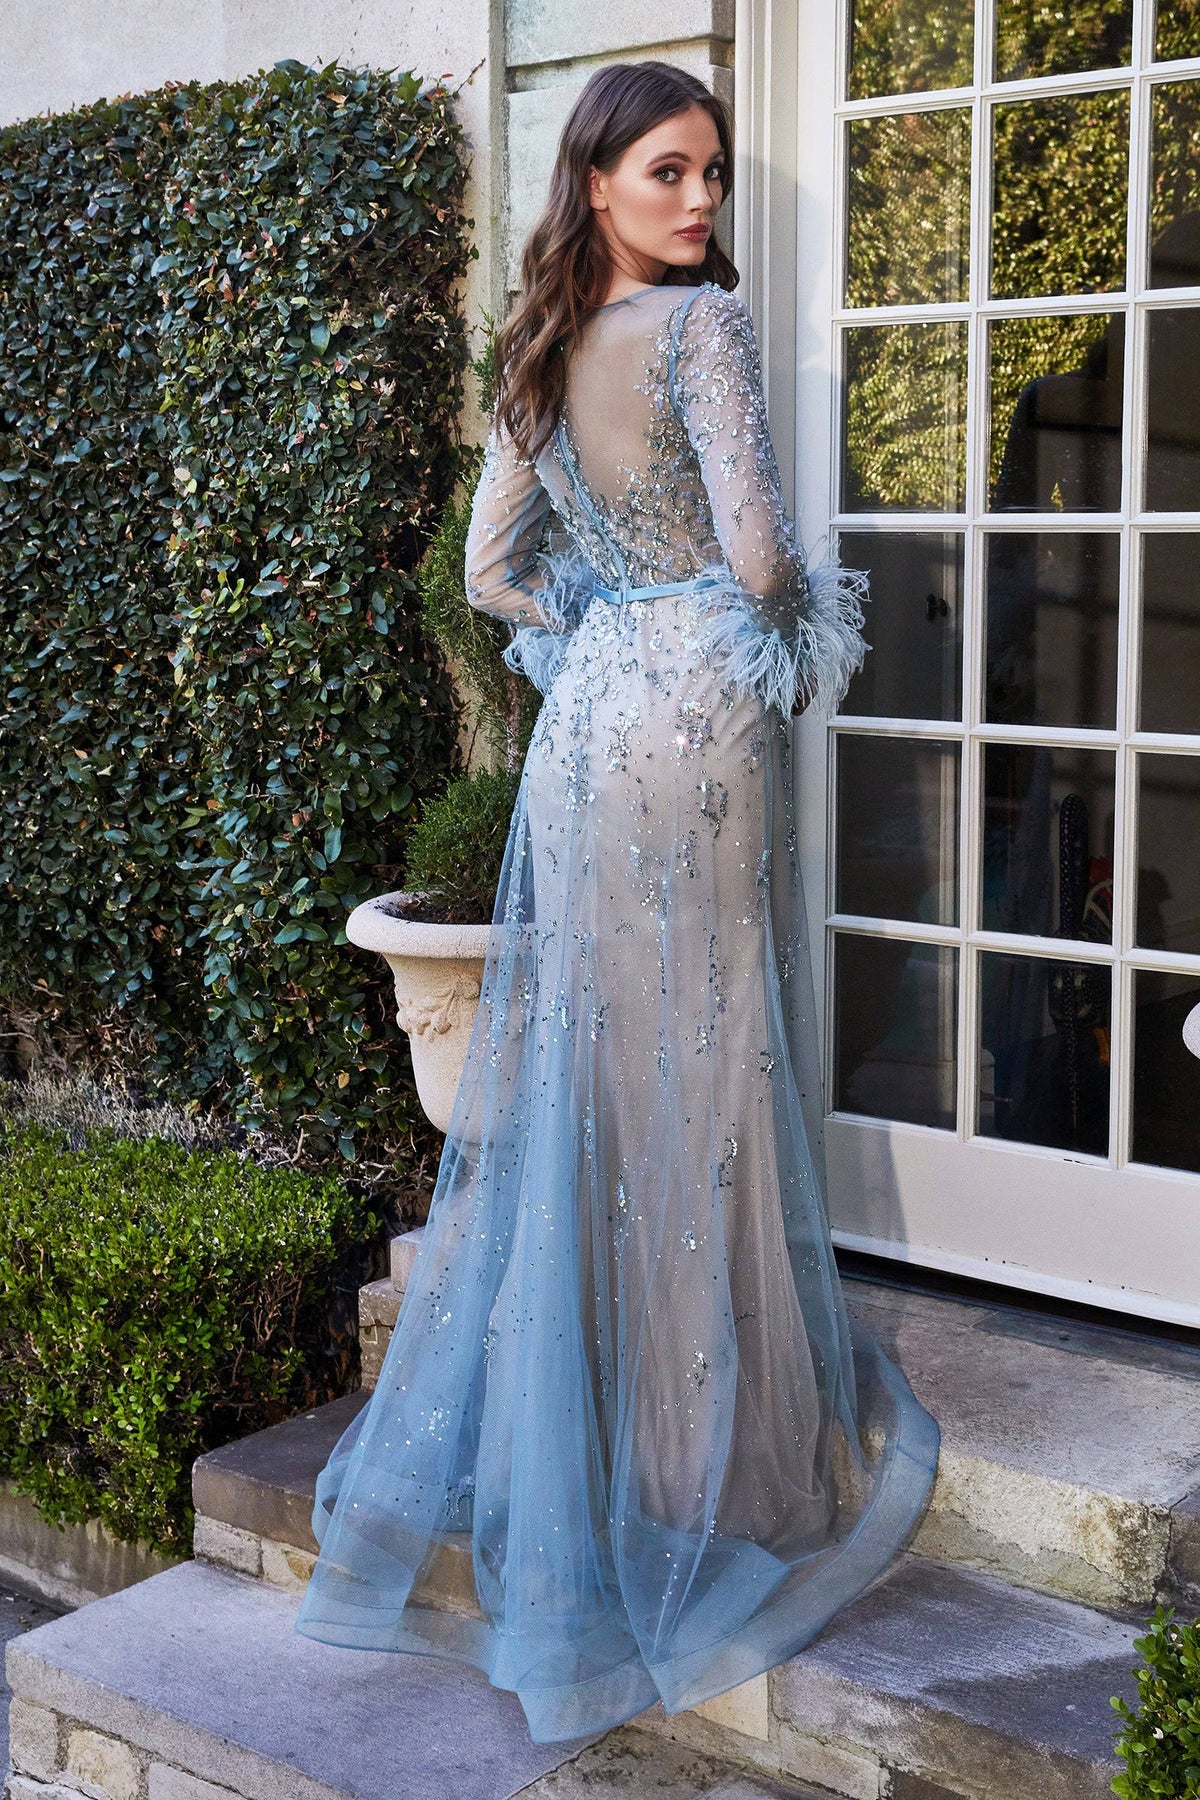 Pretty Long Dress With Sheer Overlay and Feather Accents on Sleeves #CDB716 - NORMA REED